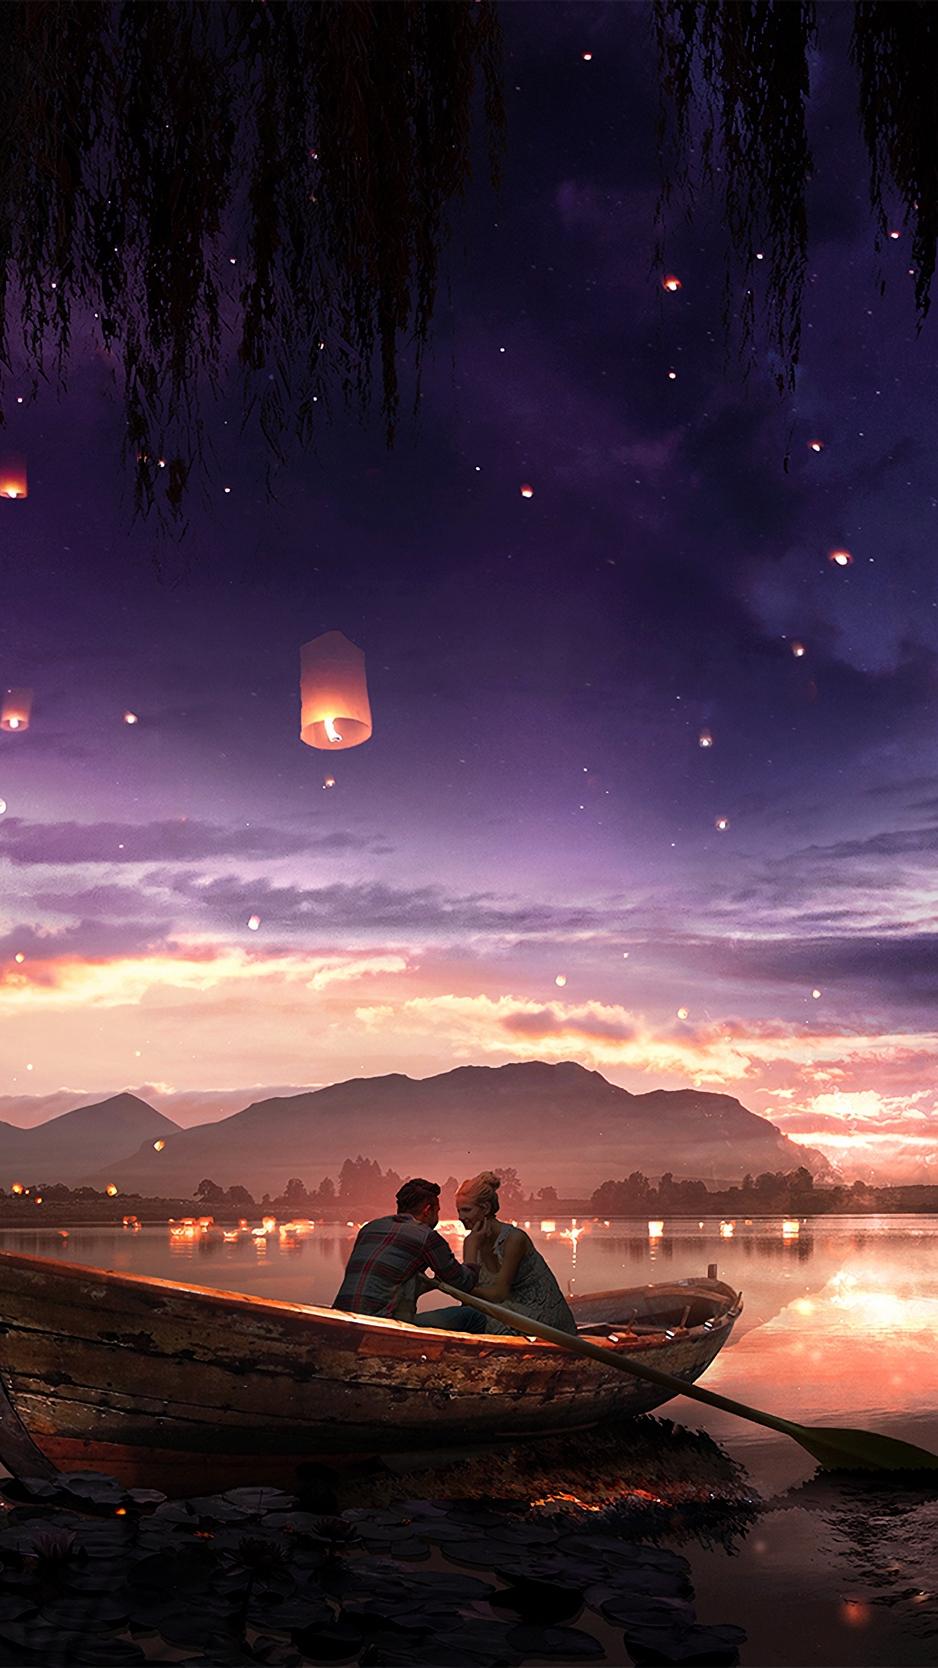 Download wallpapers 938x1668 boat, couple, stars, night, romance